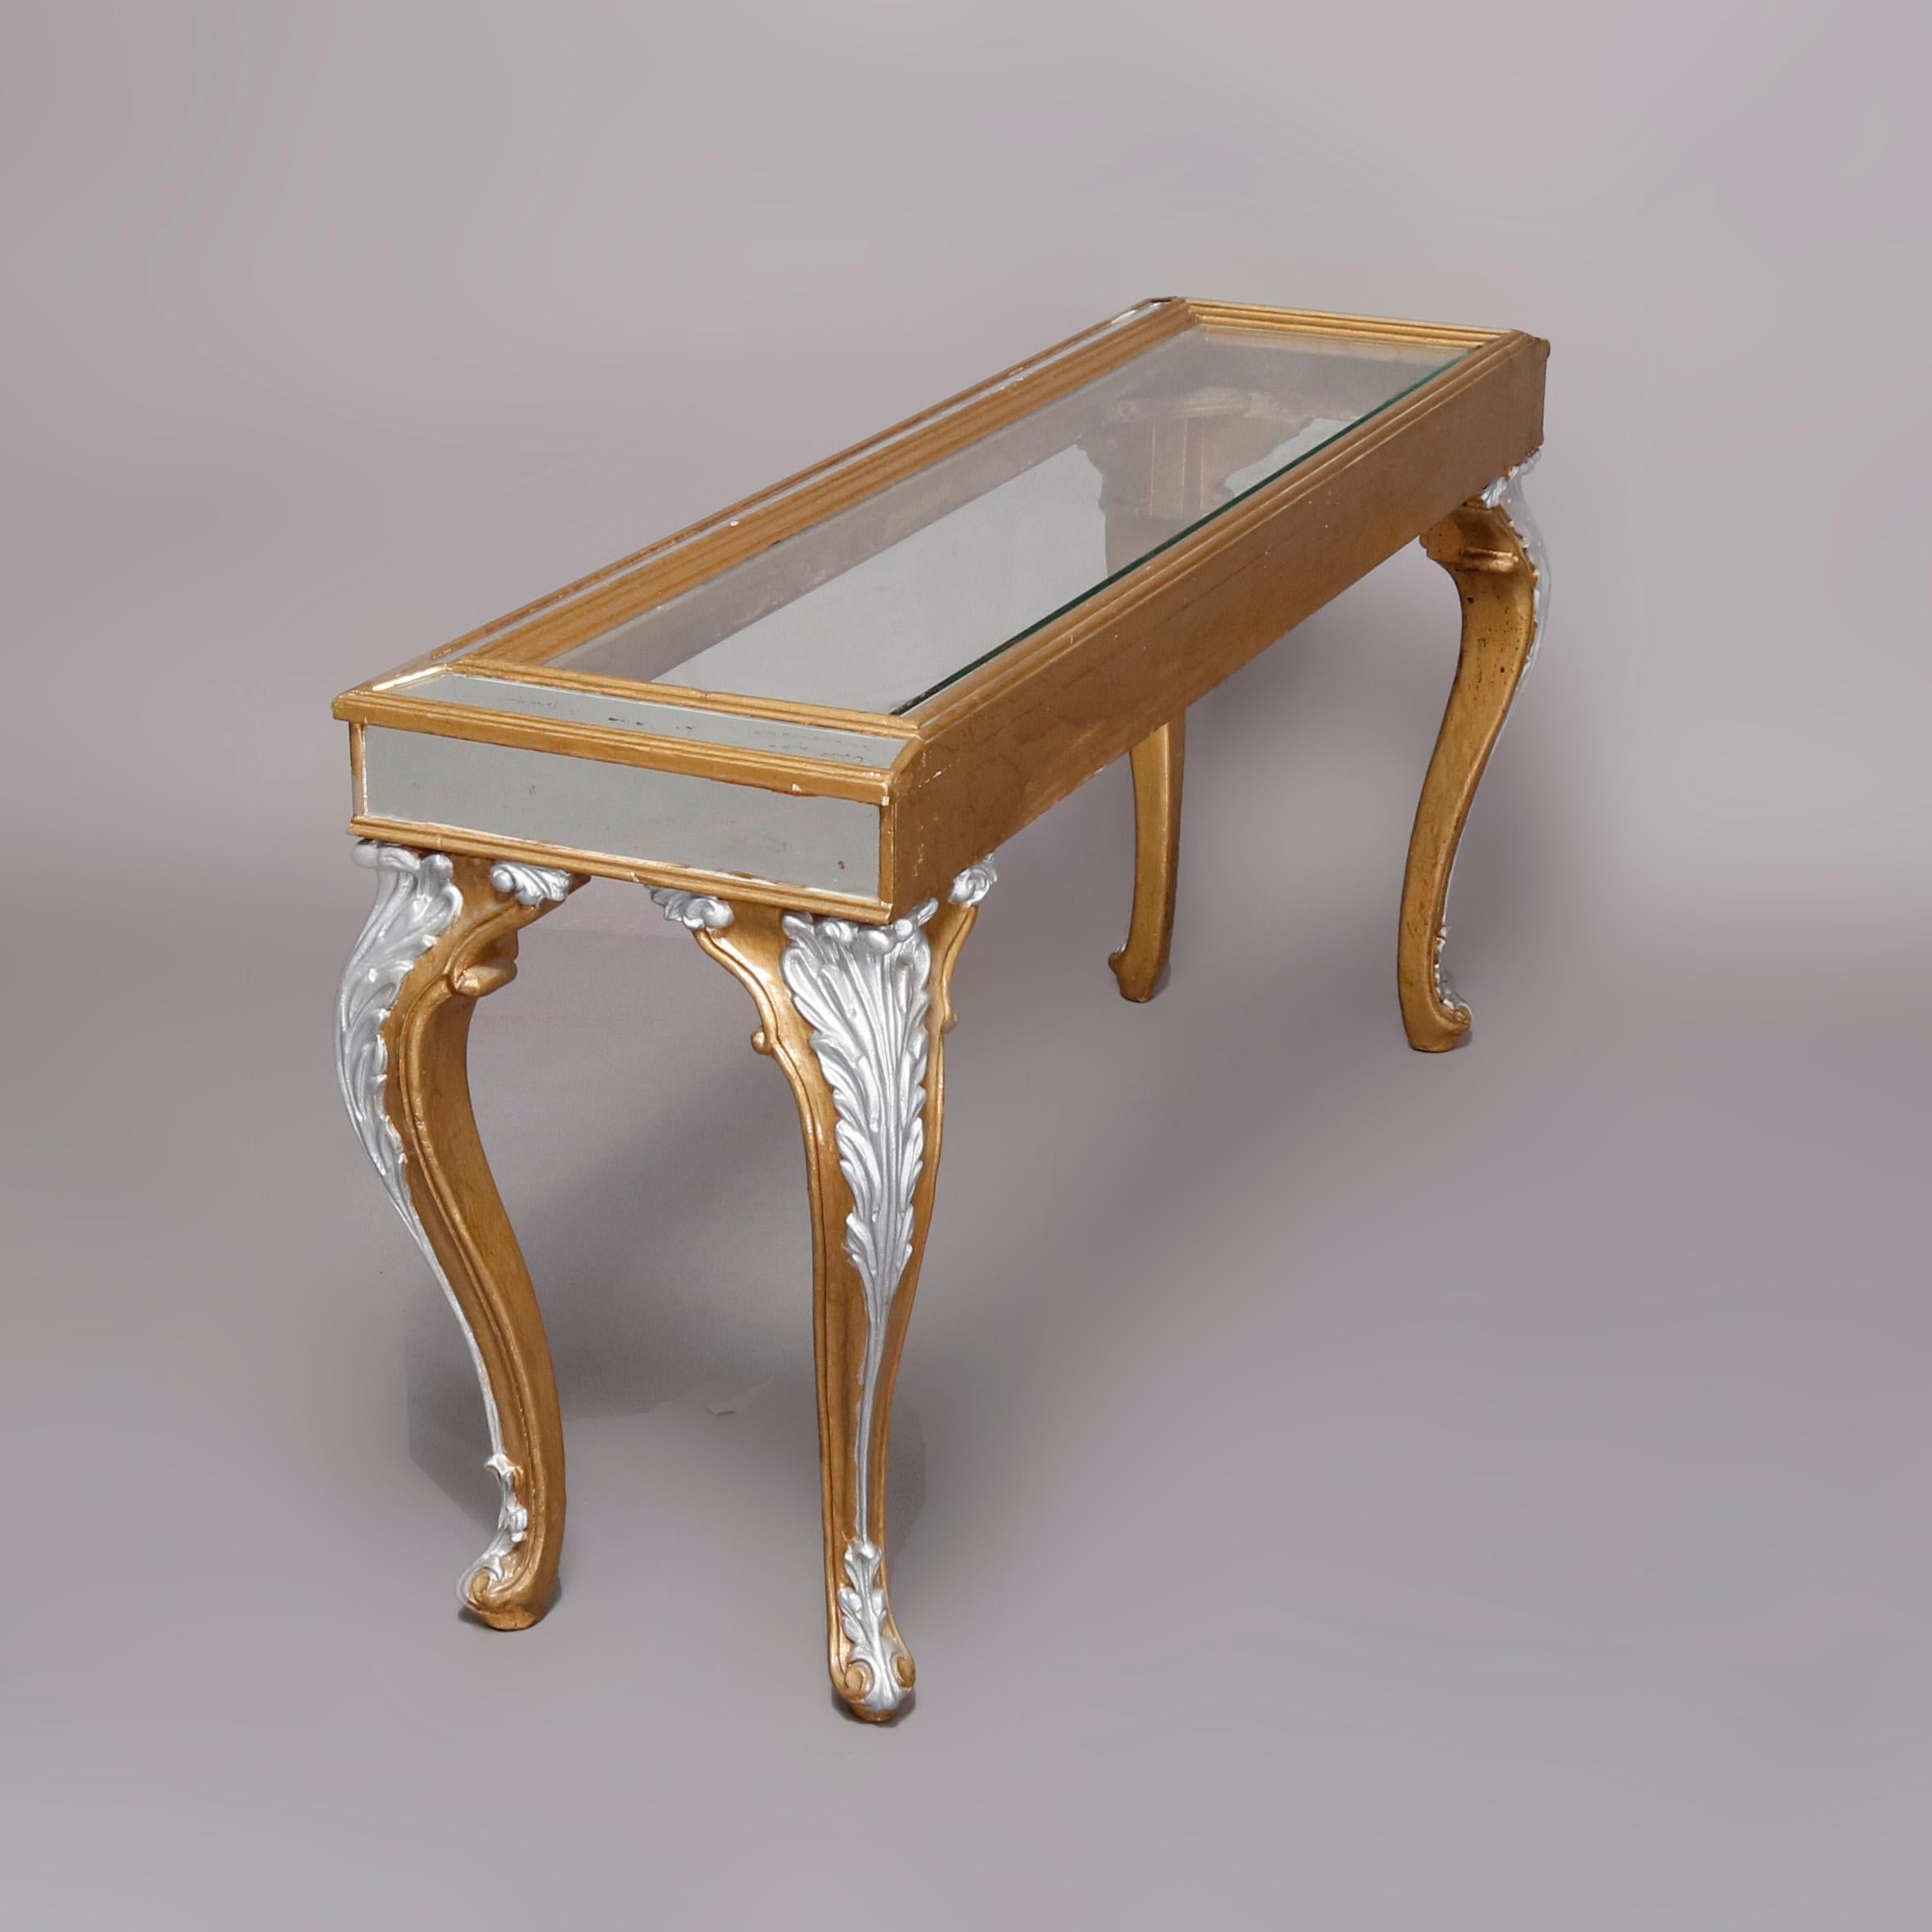 Vintage French Louis XIV style sofa table offers carved base with faceted top having glass with mirrored borders in gold gilt frame with raised on cabriole legs having silver gilt knees and feet, 20th century


Measures: 26.25